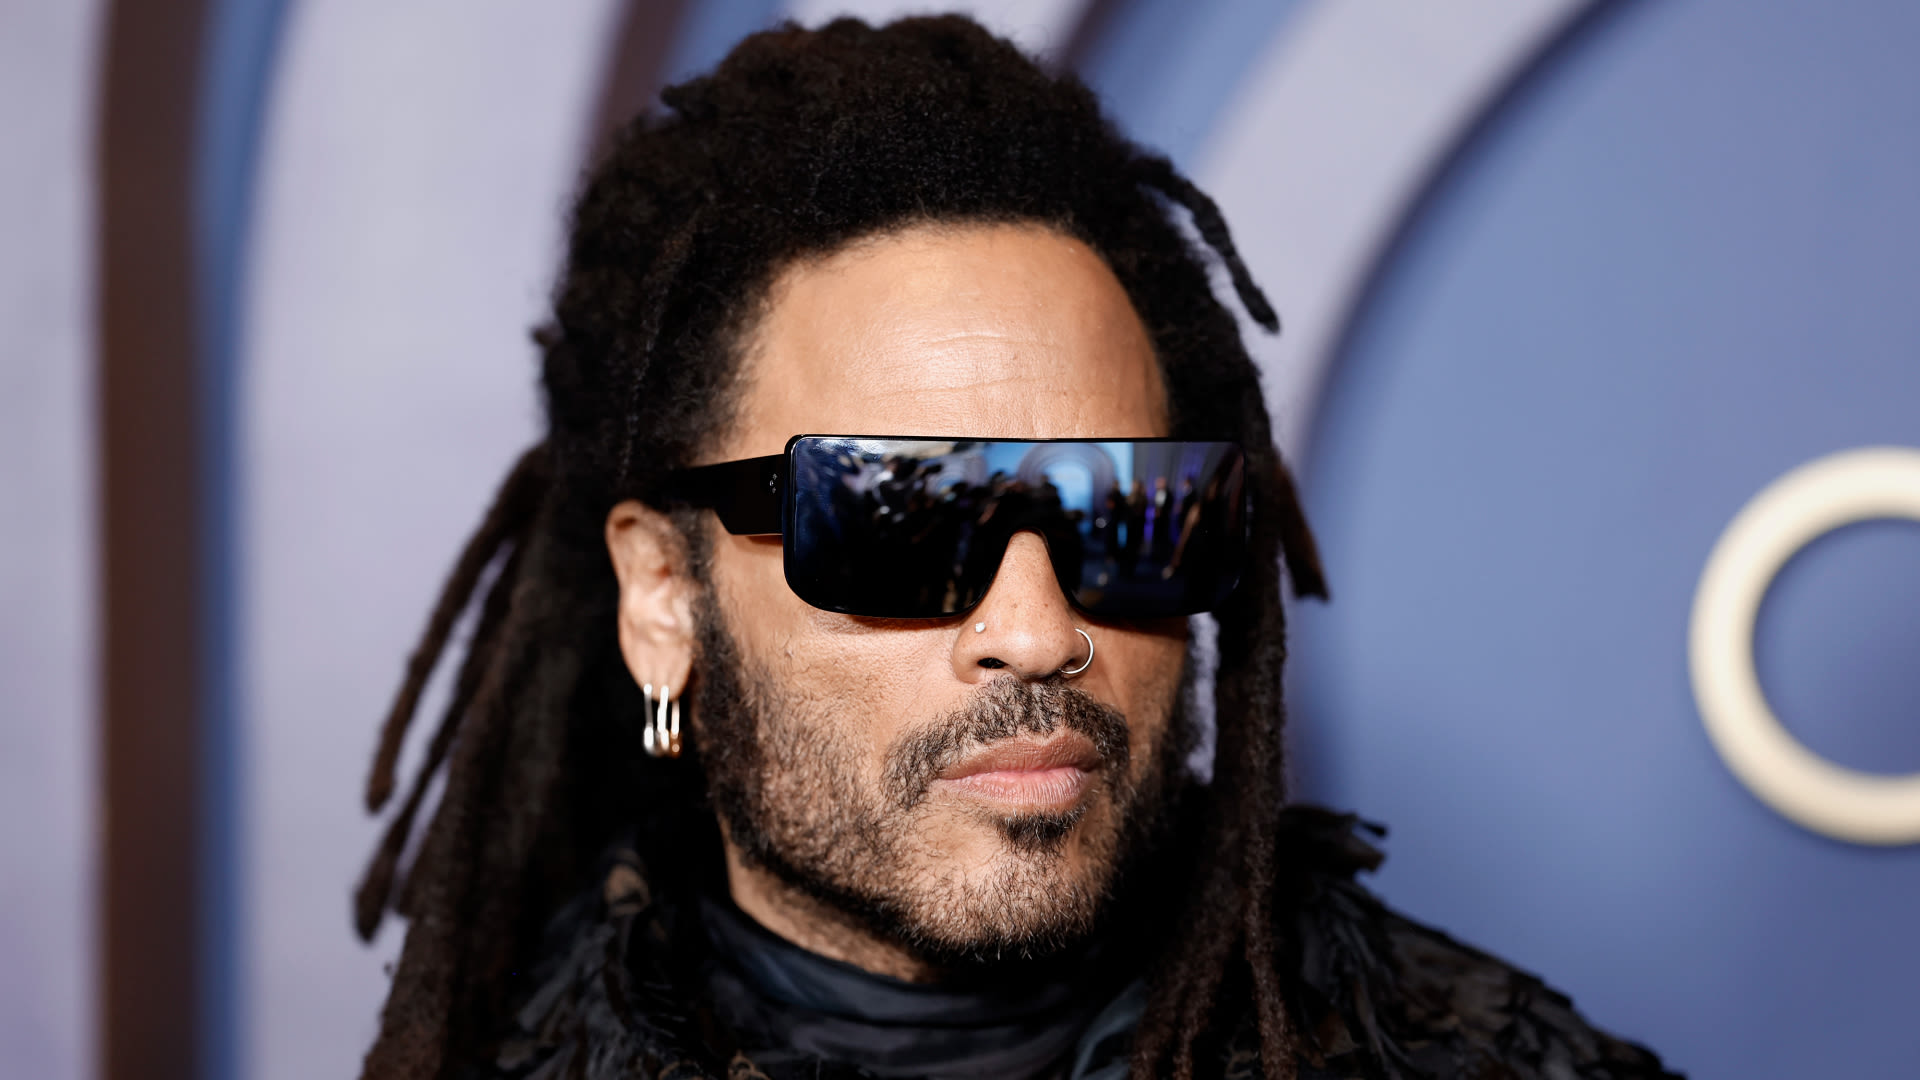 Lenny Kravitz Talks New Music, Return to Touring and Teases “I’m Making My Own Film”